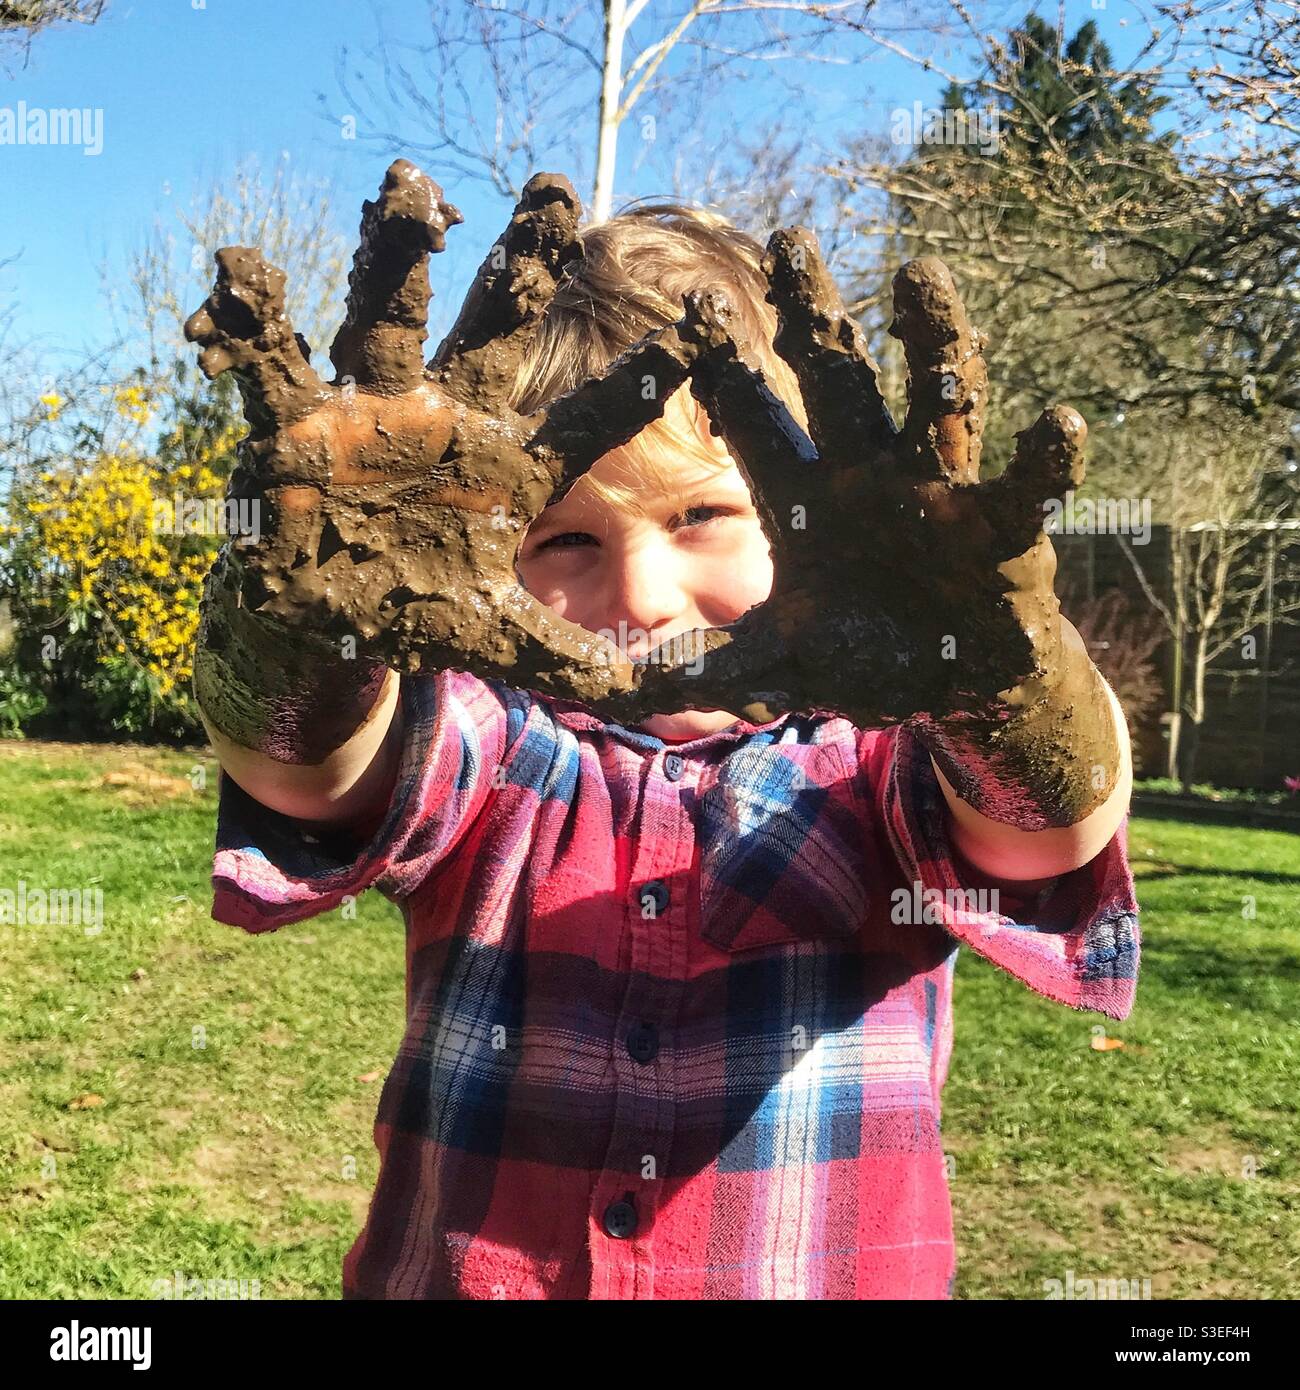 Muddy hands. A four year old boy with mud on his hands. Stock Photo